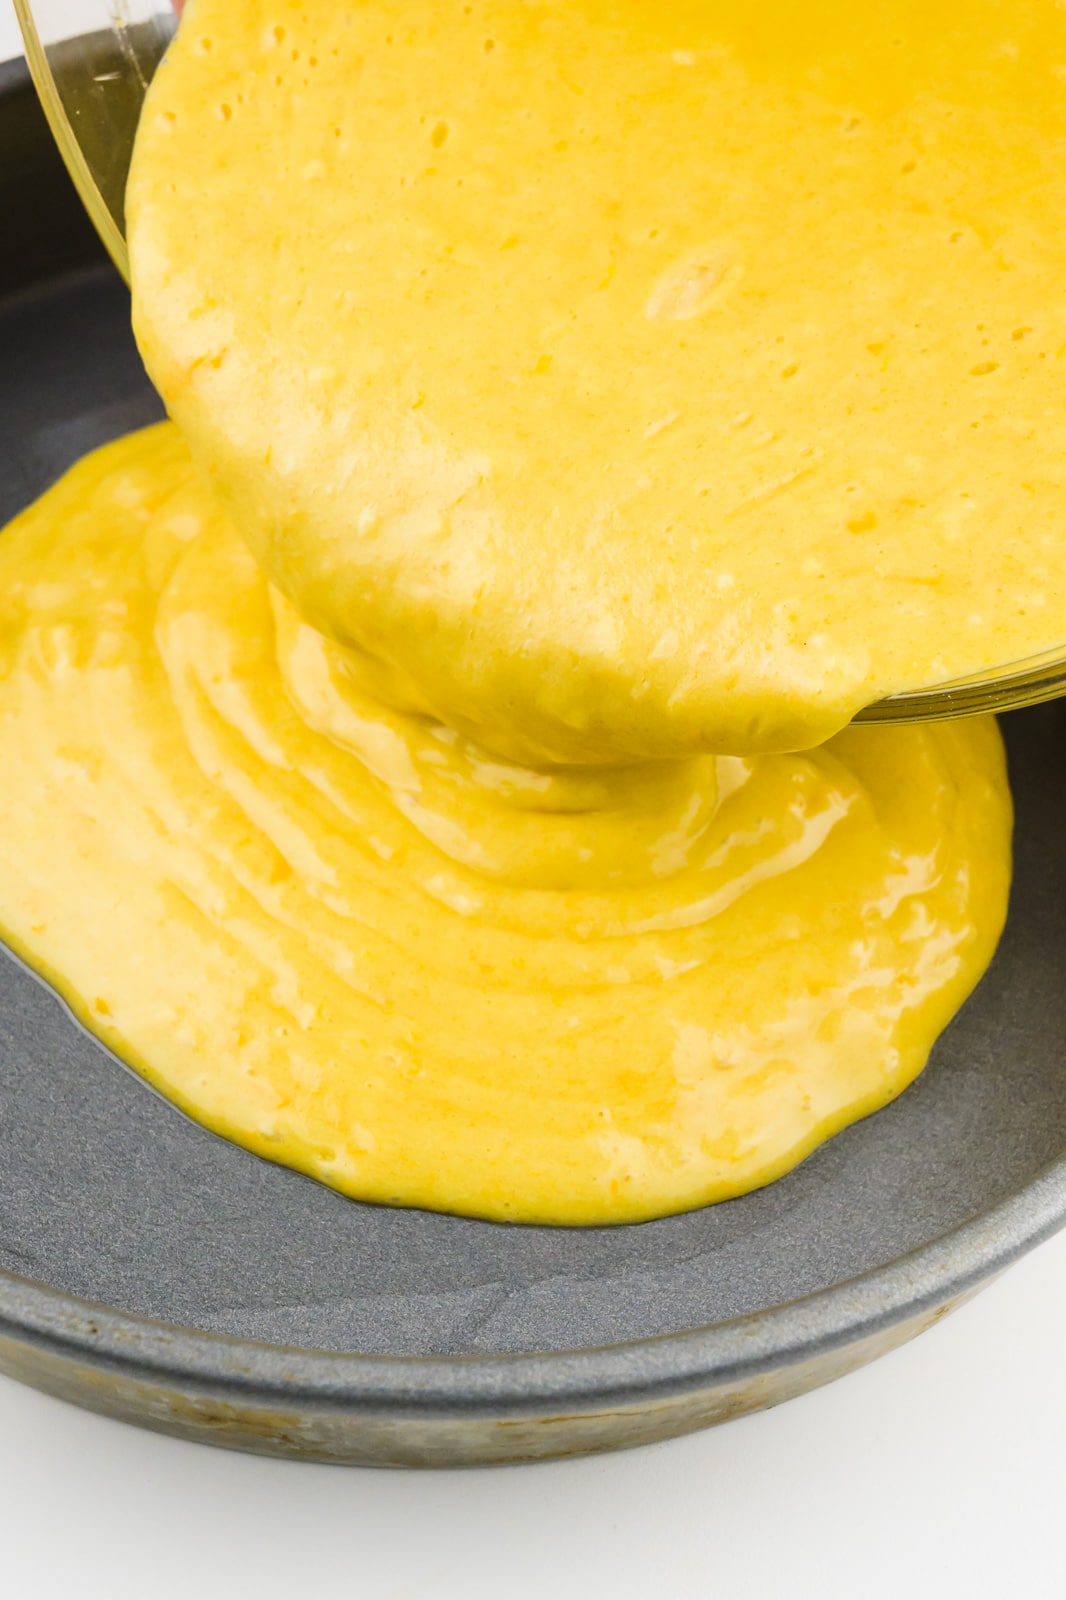 Orange cake batter is being poured into a cake pan.